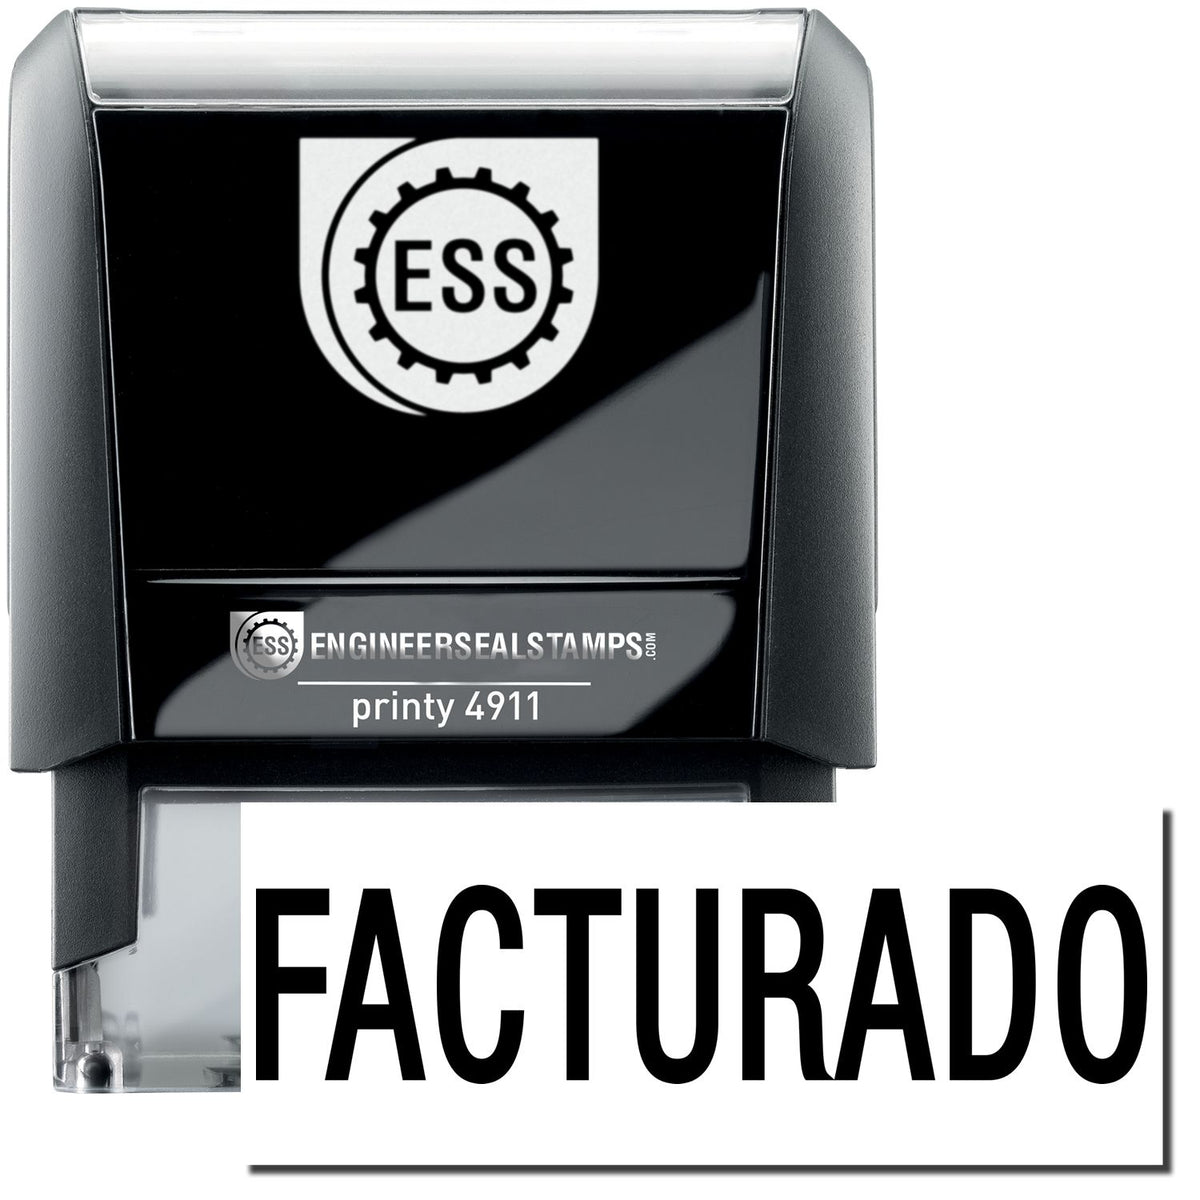 A self-inking stamp with a stamped image showing how the text &quot;FACTURADO&quot; is displayed after stamping.